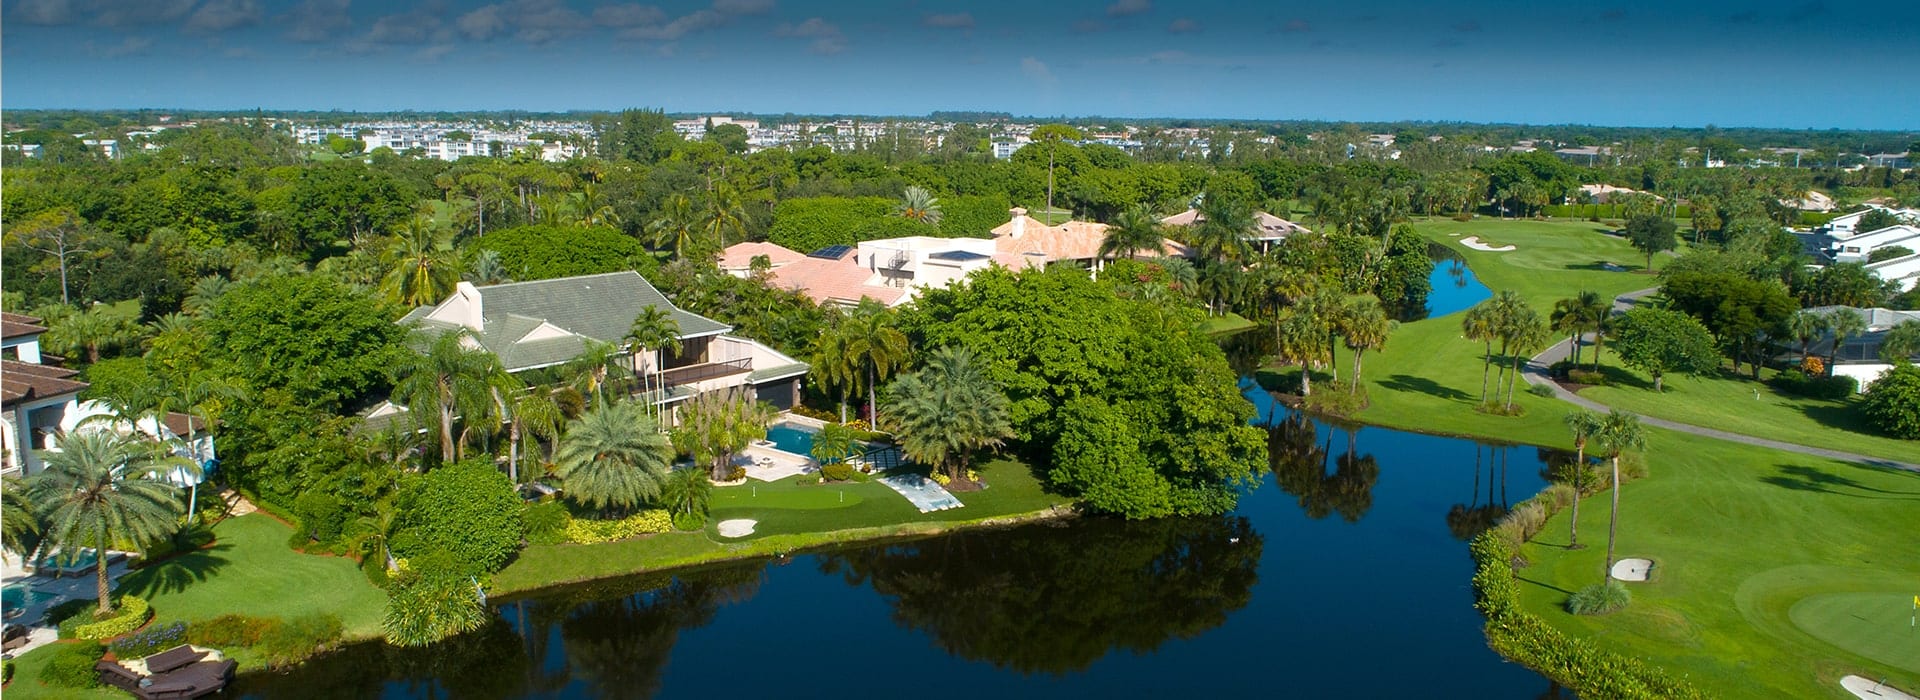 Boca West's The Island neighborhood of custom-built homes, each with a view of the golf course and water